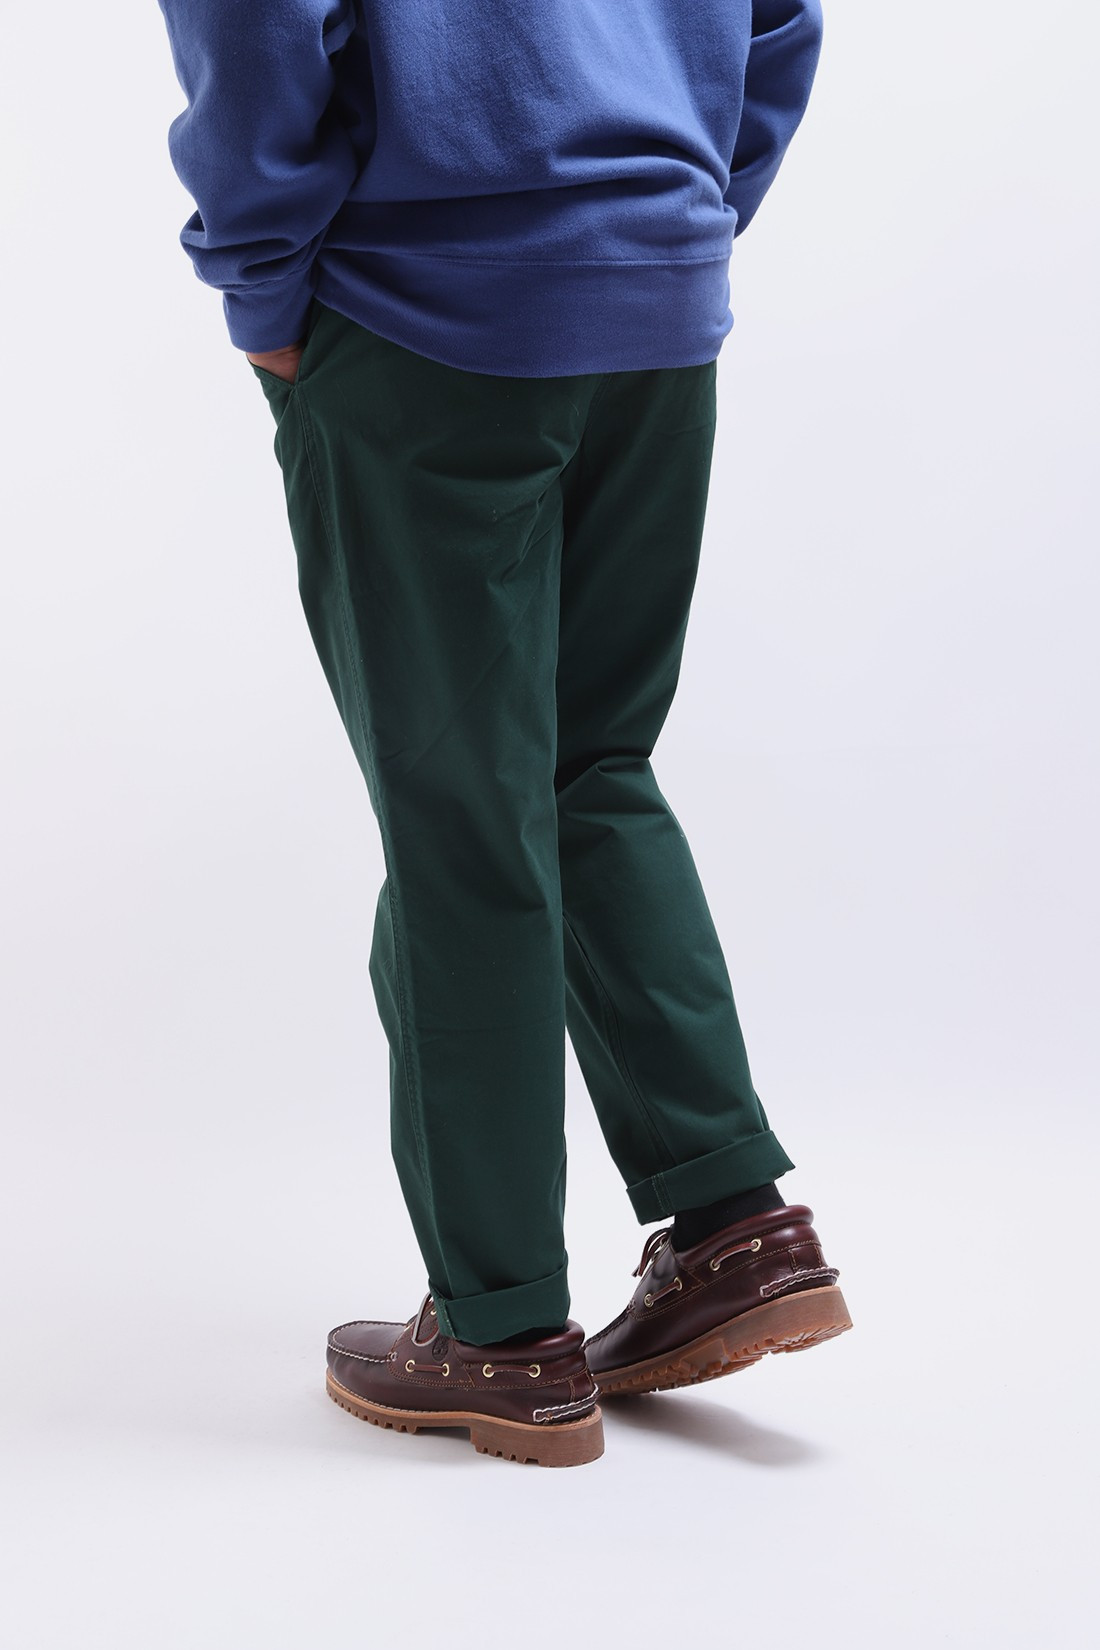 POLO RALPH LAUREN / Relaxed fit prepster pant College green